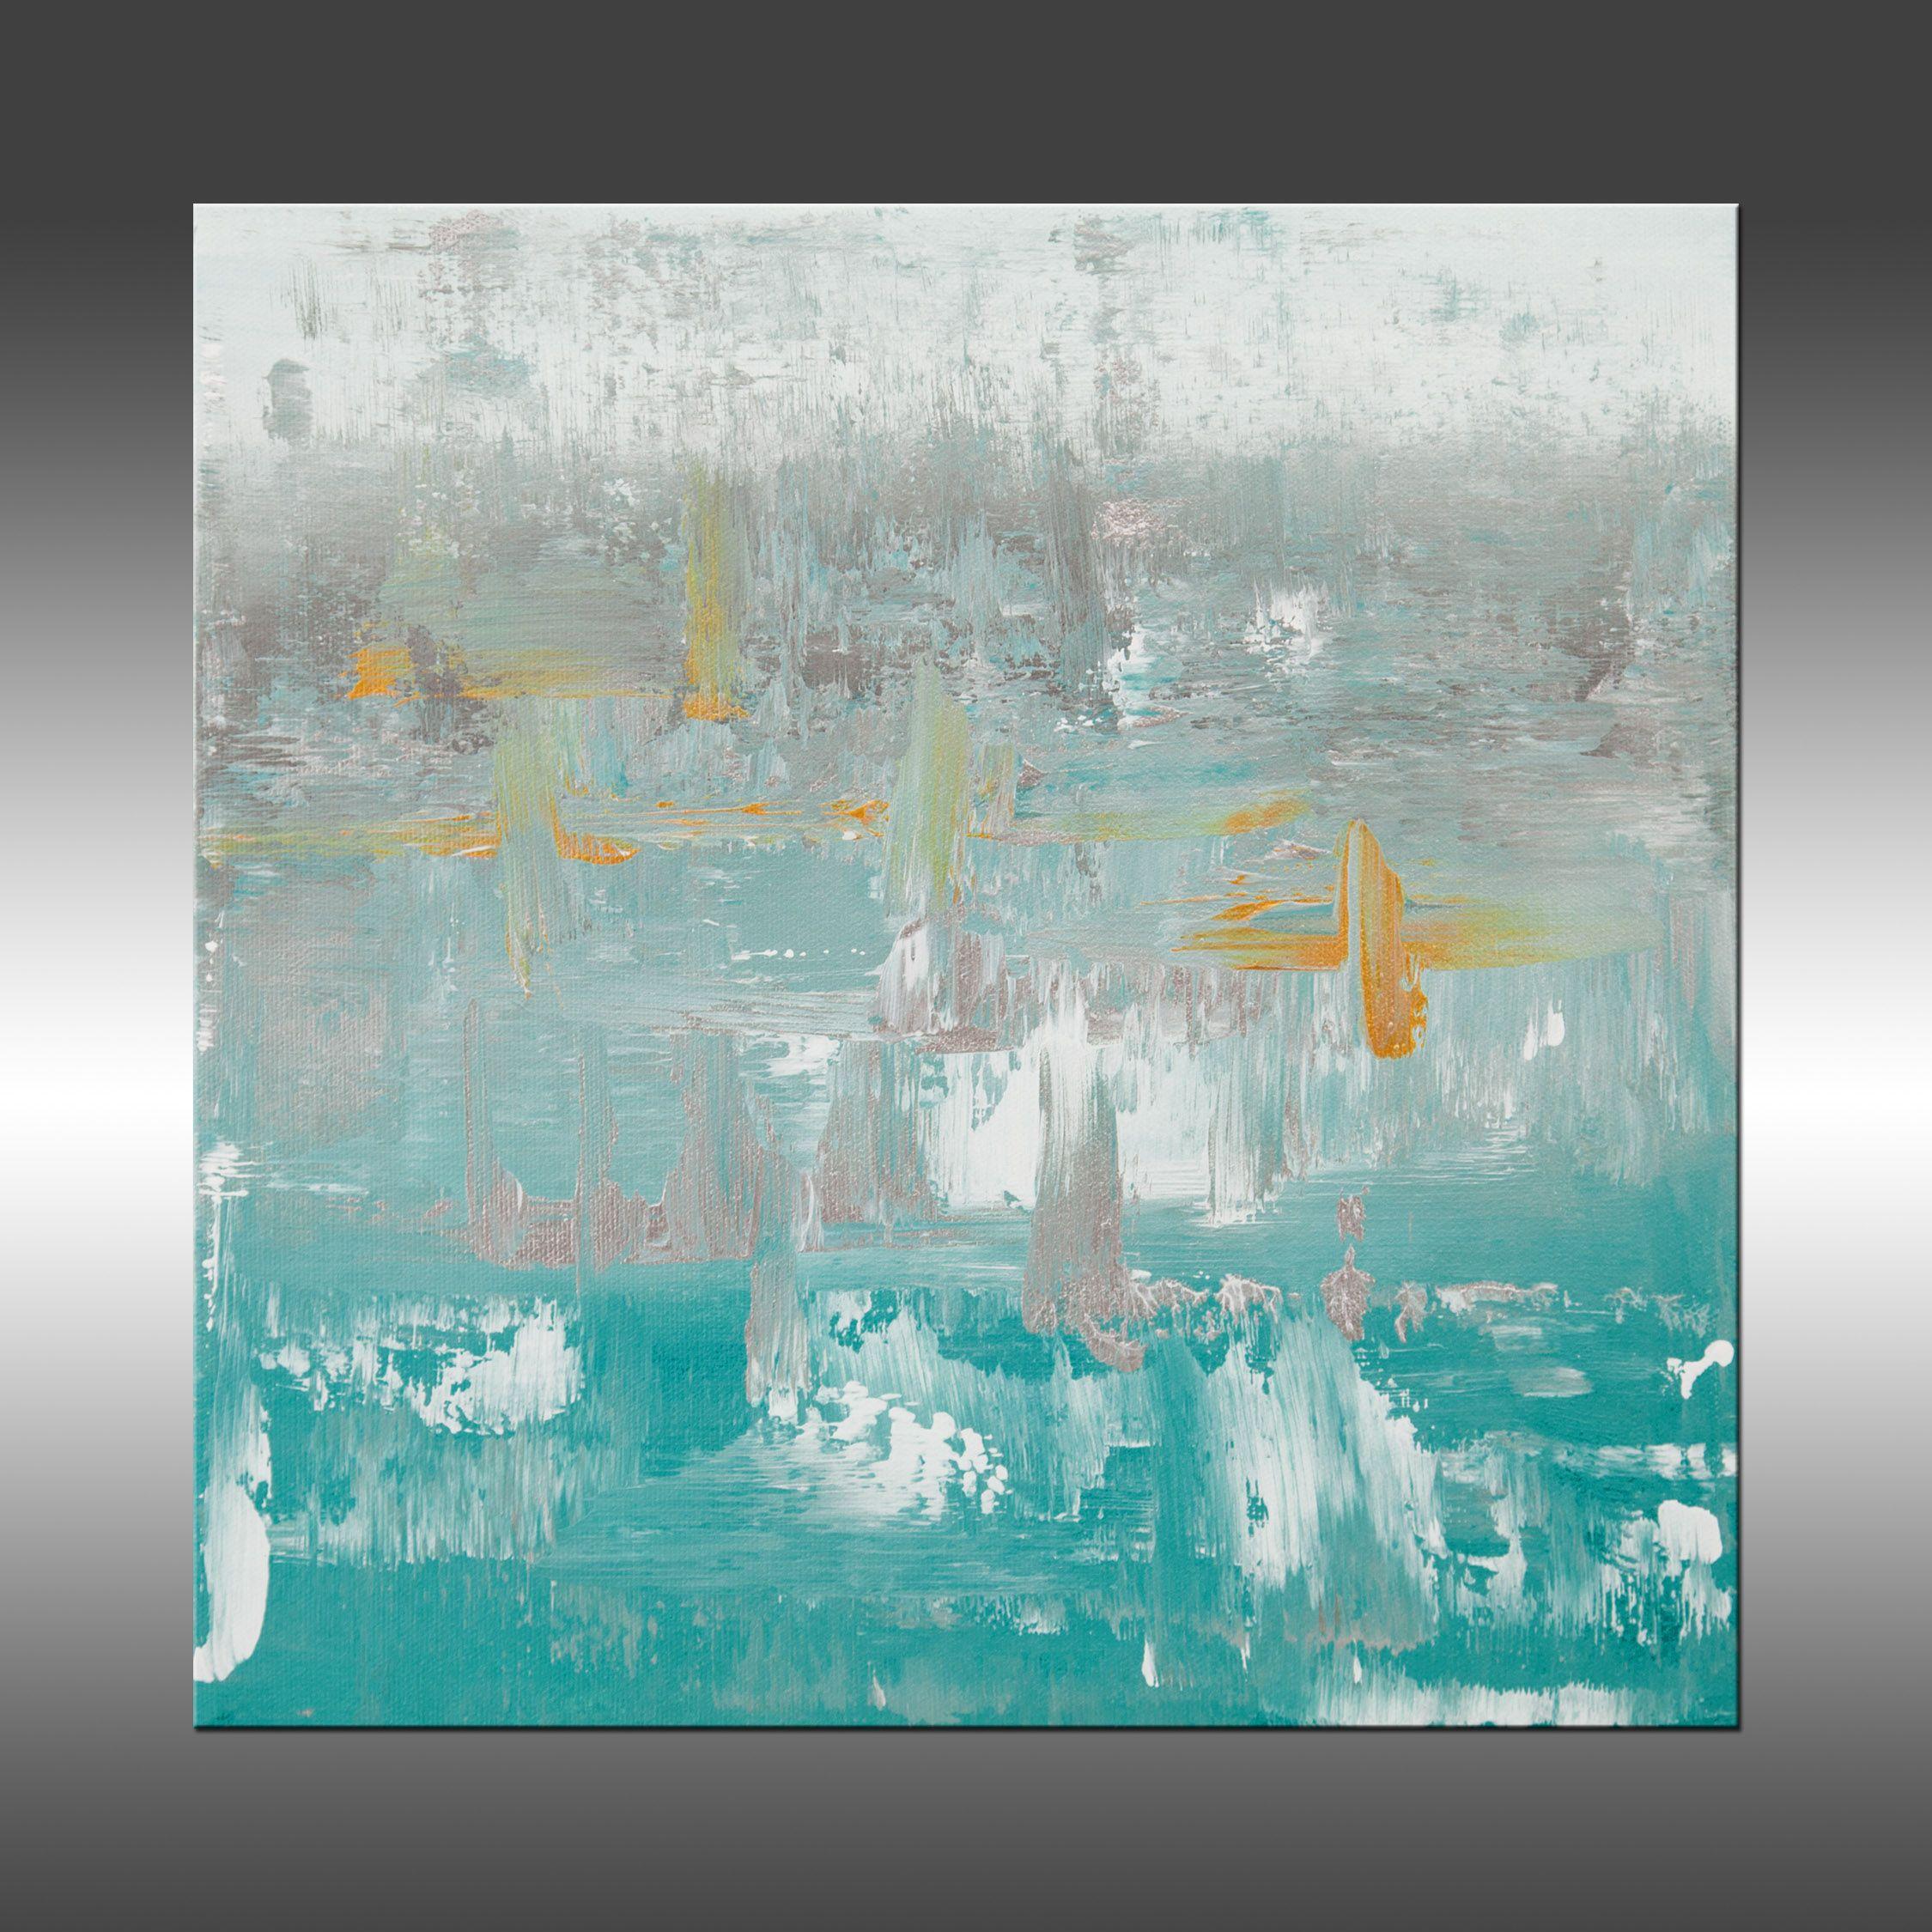 Modern Alchemy is an original painting, created with acrylic paint on gallery-wrapped canvas. It has a width of 12 inches and a height of 12 inches with a depth of 1.5 inches (12x12x1.5).    The colors used in the painting are gray, white, teal, and